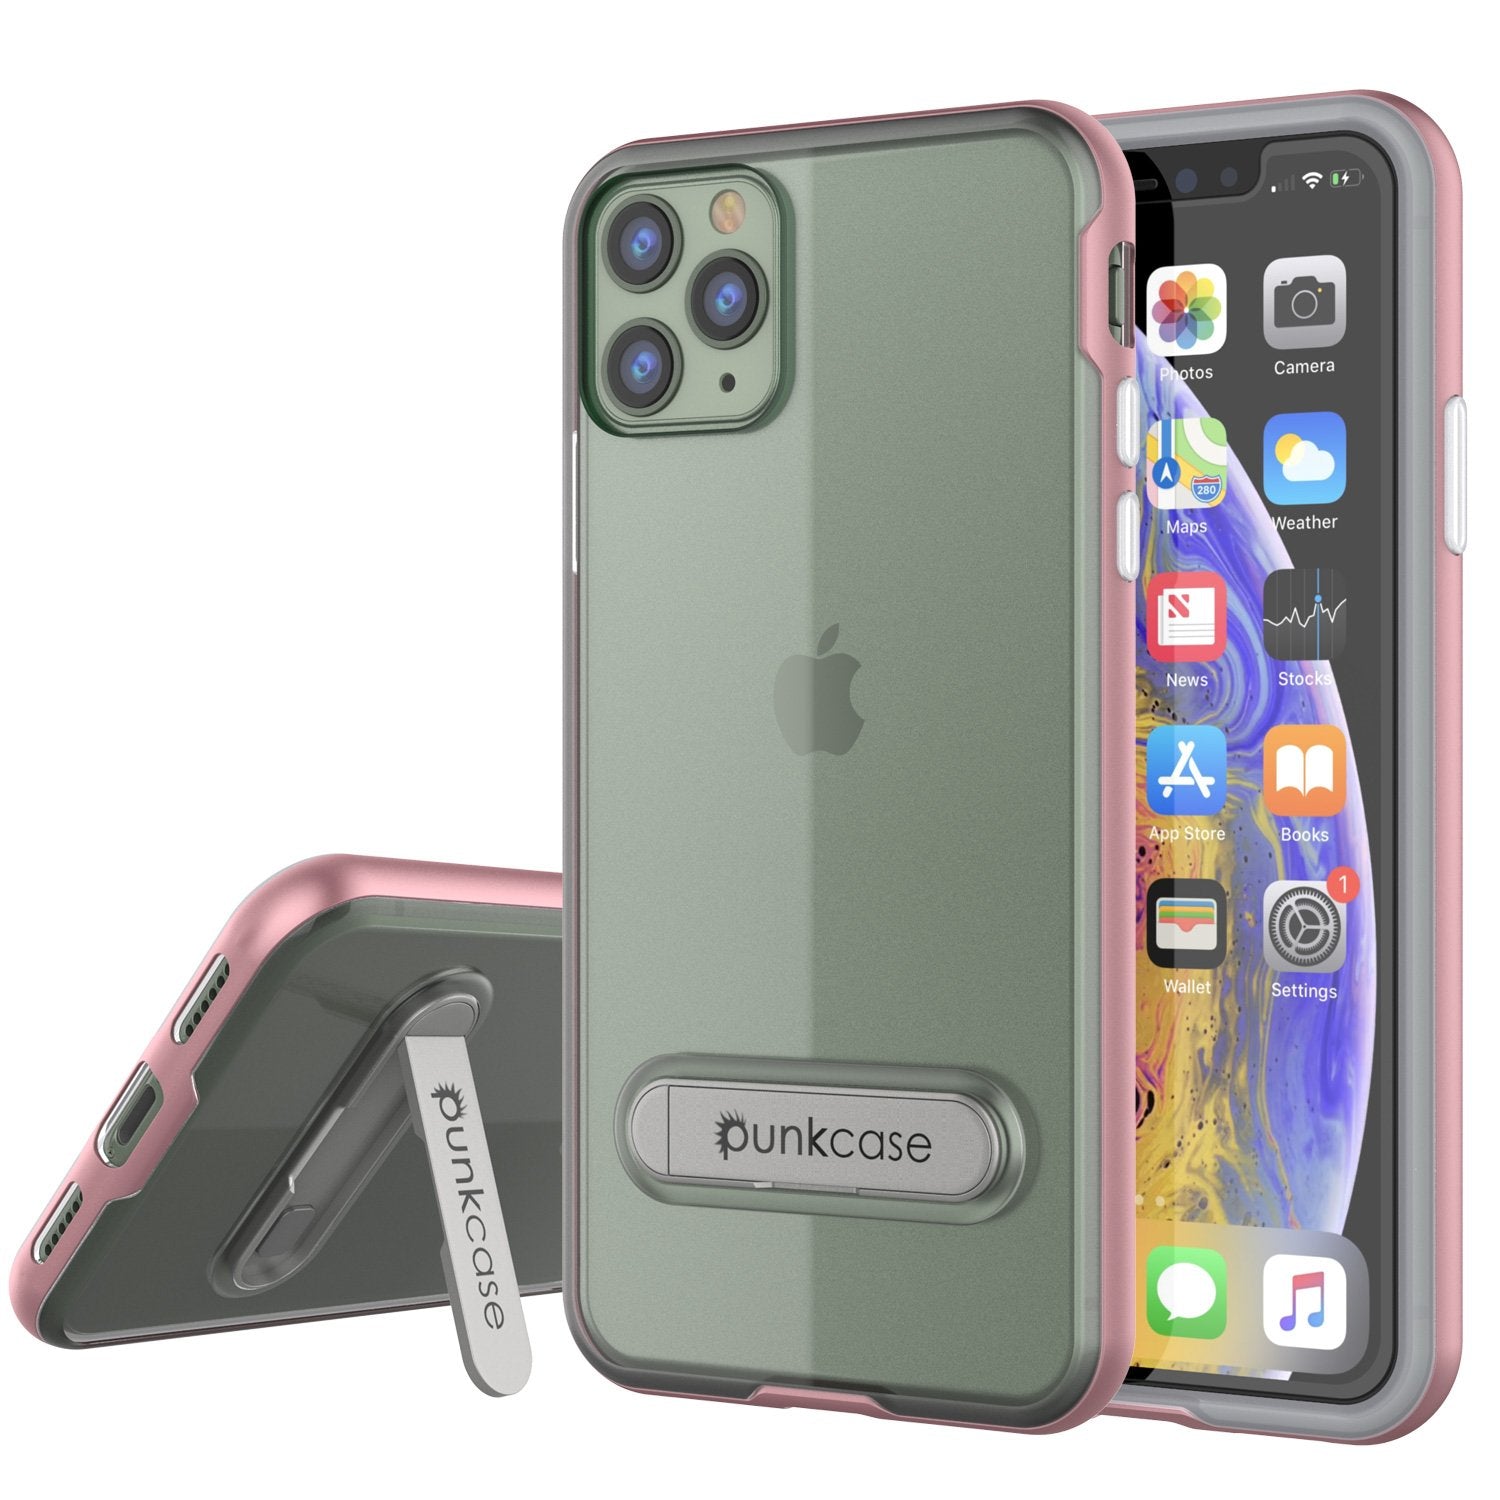 iPhone 12 Pro Max Case, PUNKcase [LUCID 3.0 Series] [Slim Fit] Protective Cover w/ Integrated Screen Protector [Rose Gold] (Color in image: Rose Gold)